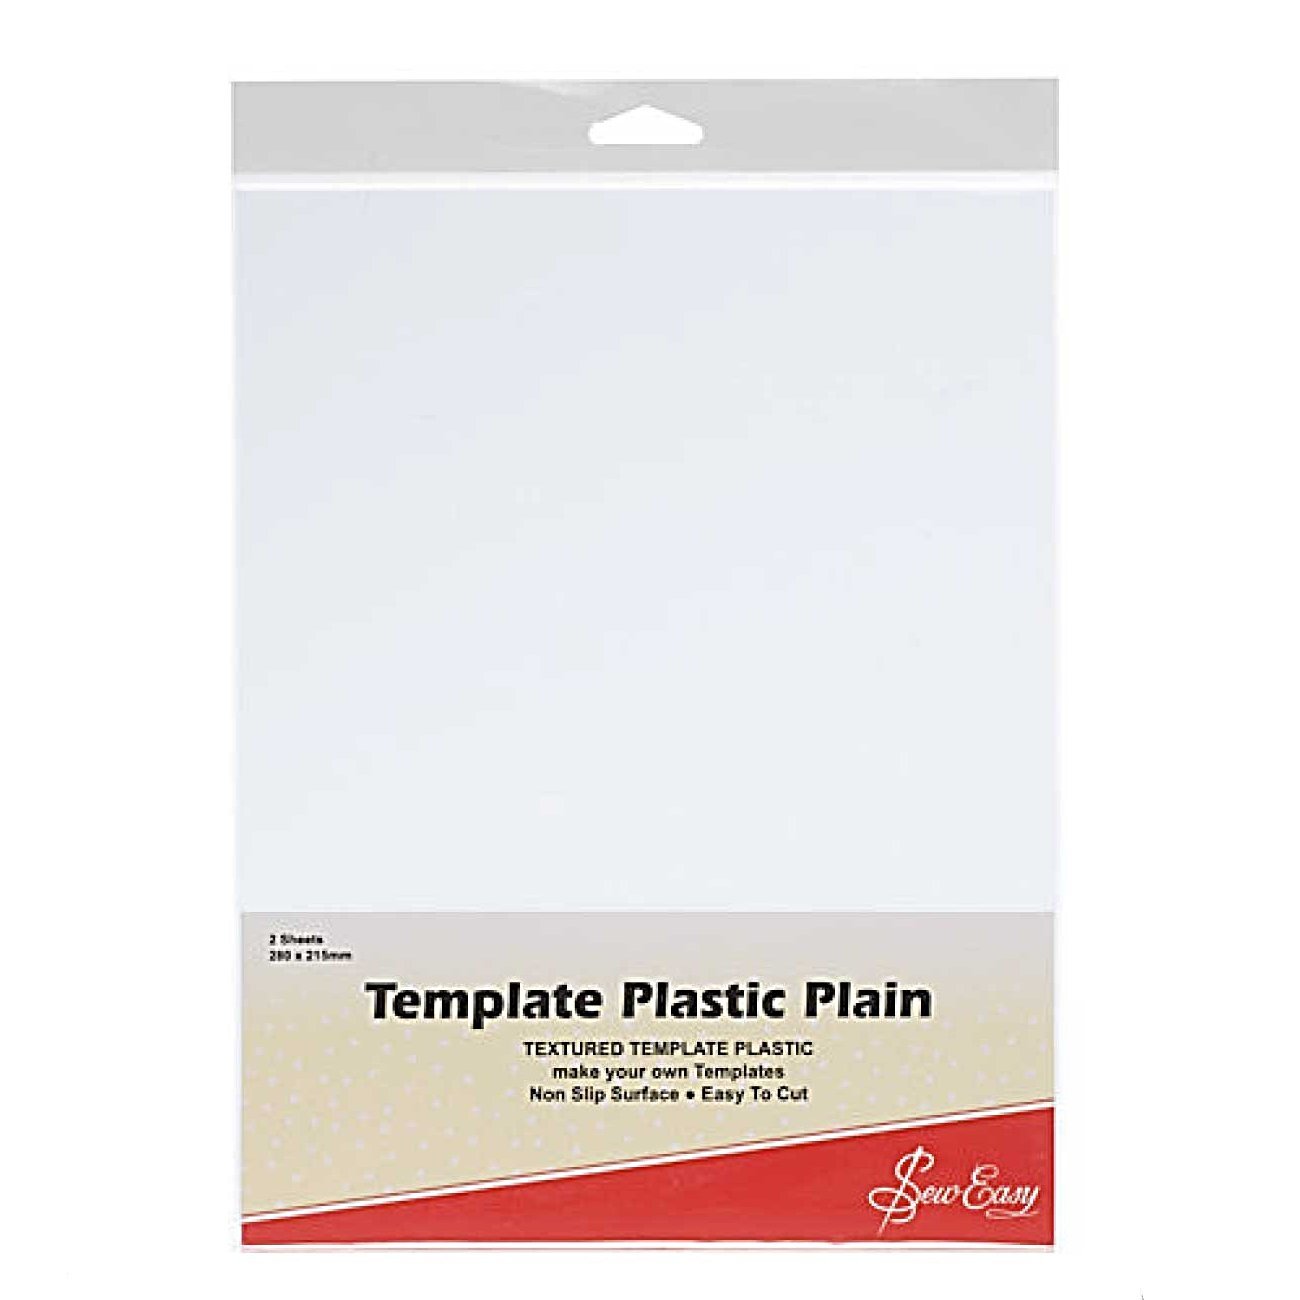 Sew Easy Template Plastic (Plain) jaycotts co uk Sewing Supplies